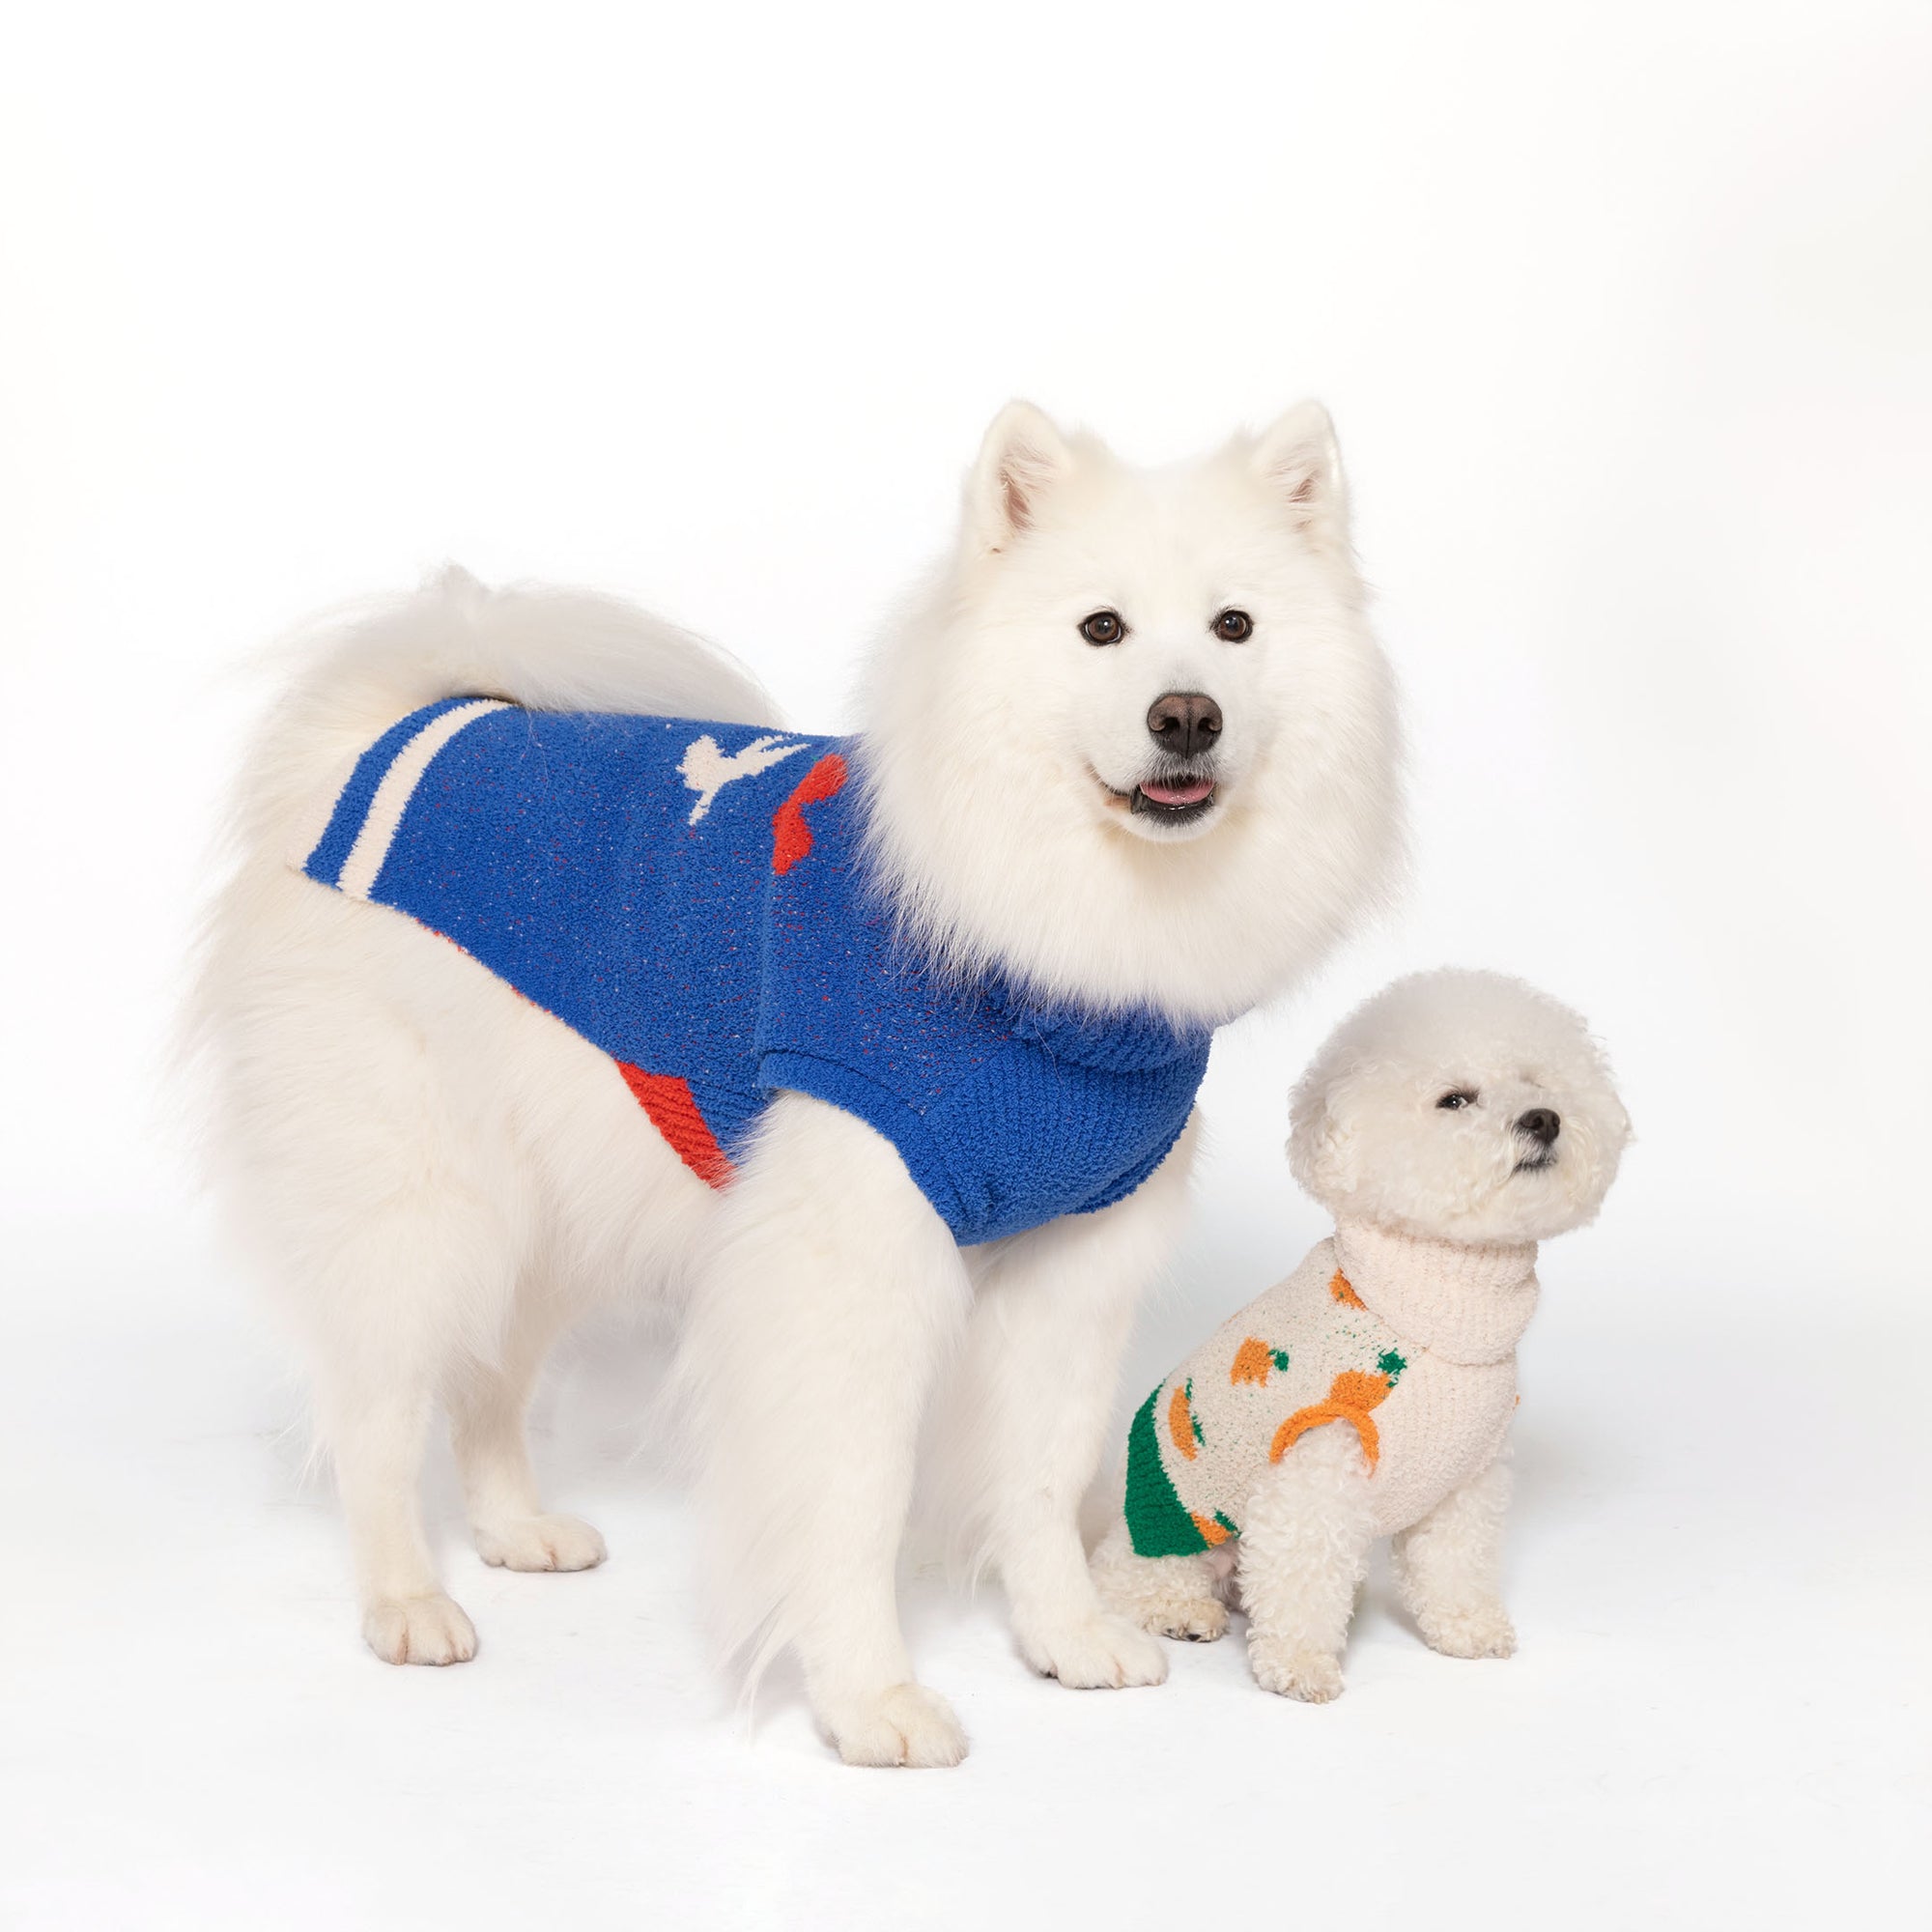 A white Samoyed and a small Bichon Frise wearing "The Furryfolks" sweaters, the larger with a love bird design, posed on a white background.